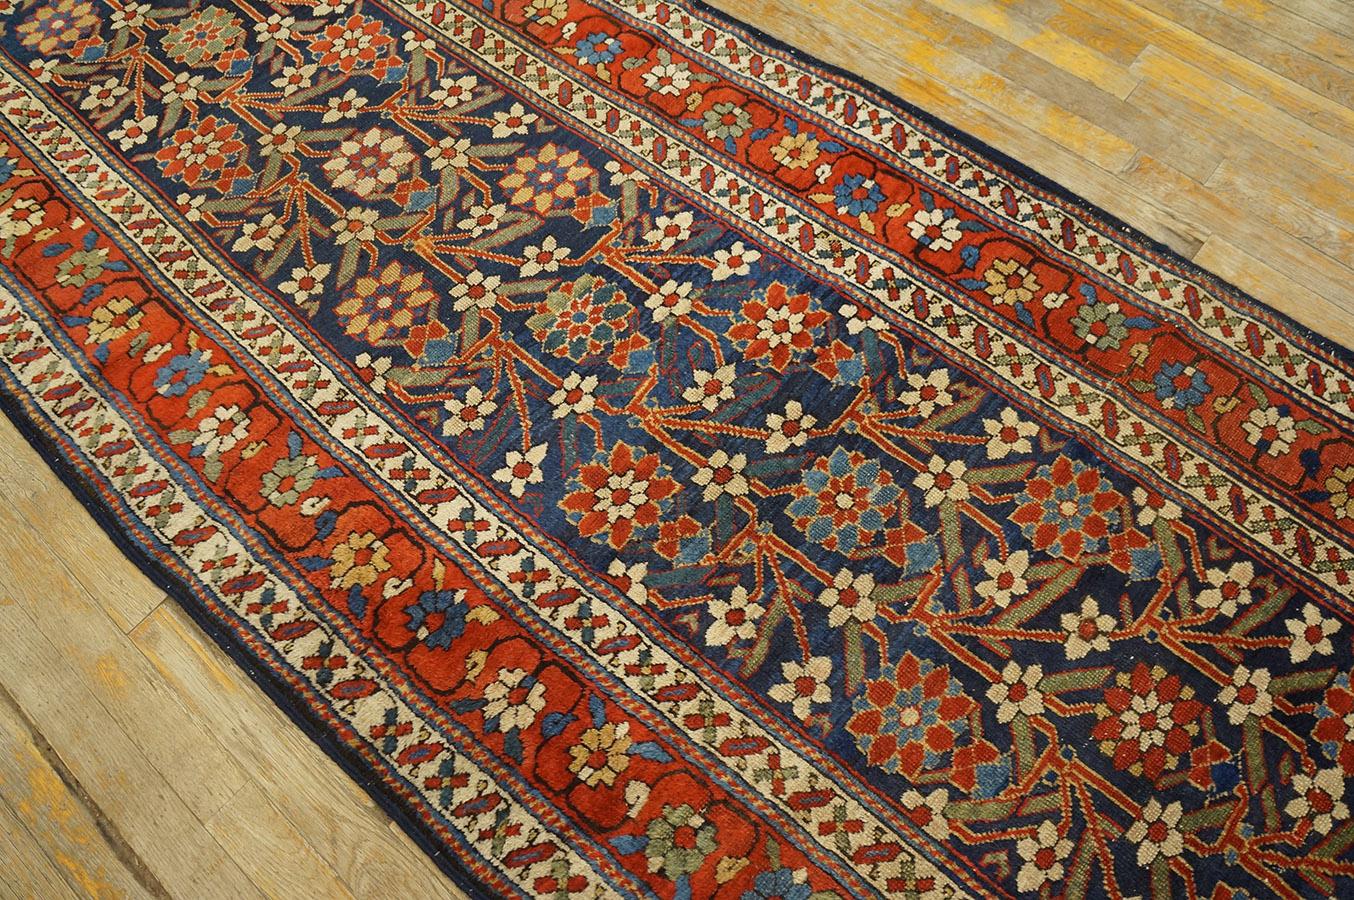 19th Century NW Persian Carpet ( 3' 3'' x 11' 8'' - 99 x 355 cm ) In Good Condition For Sale In New York, NY